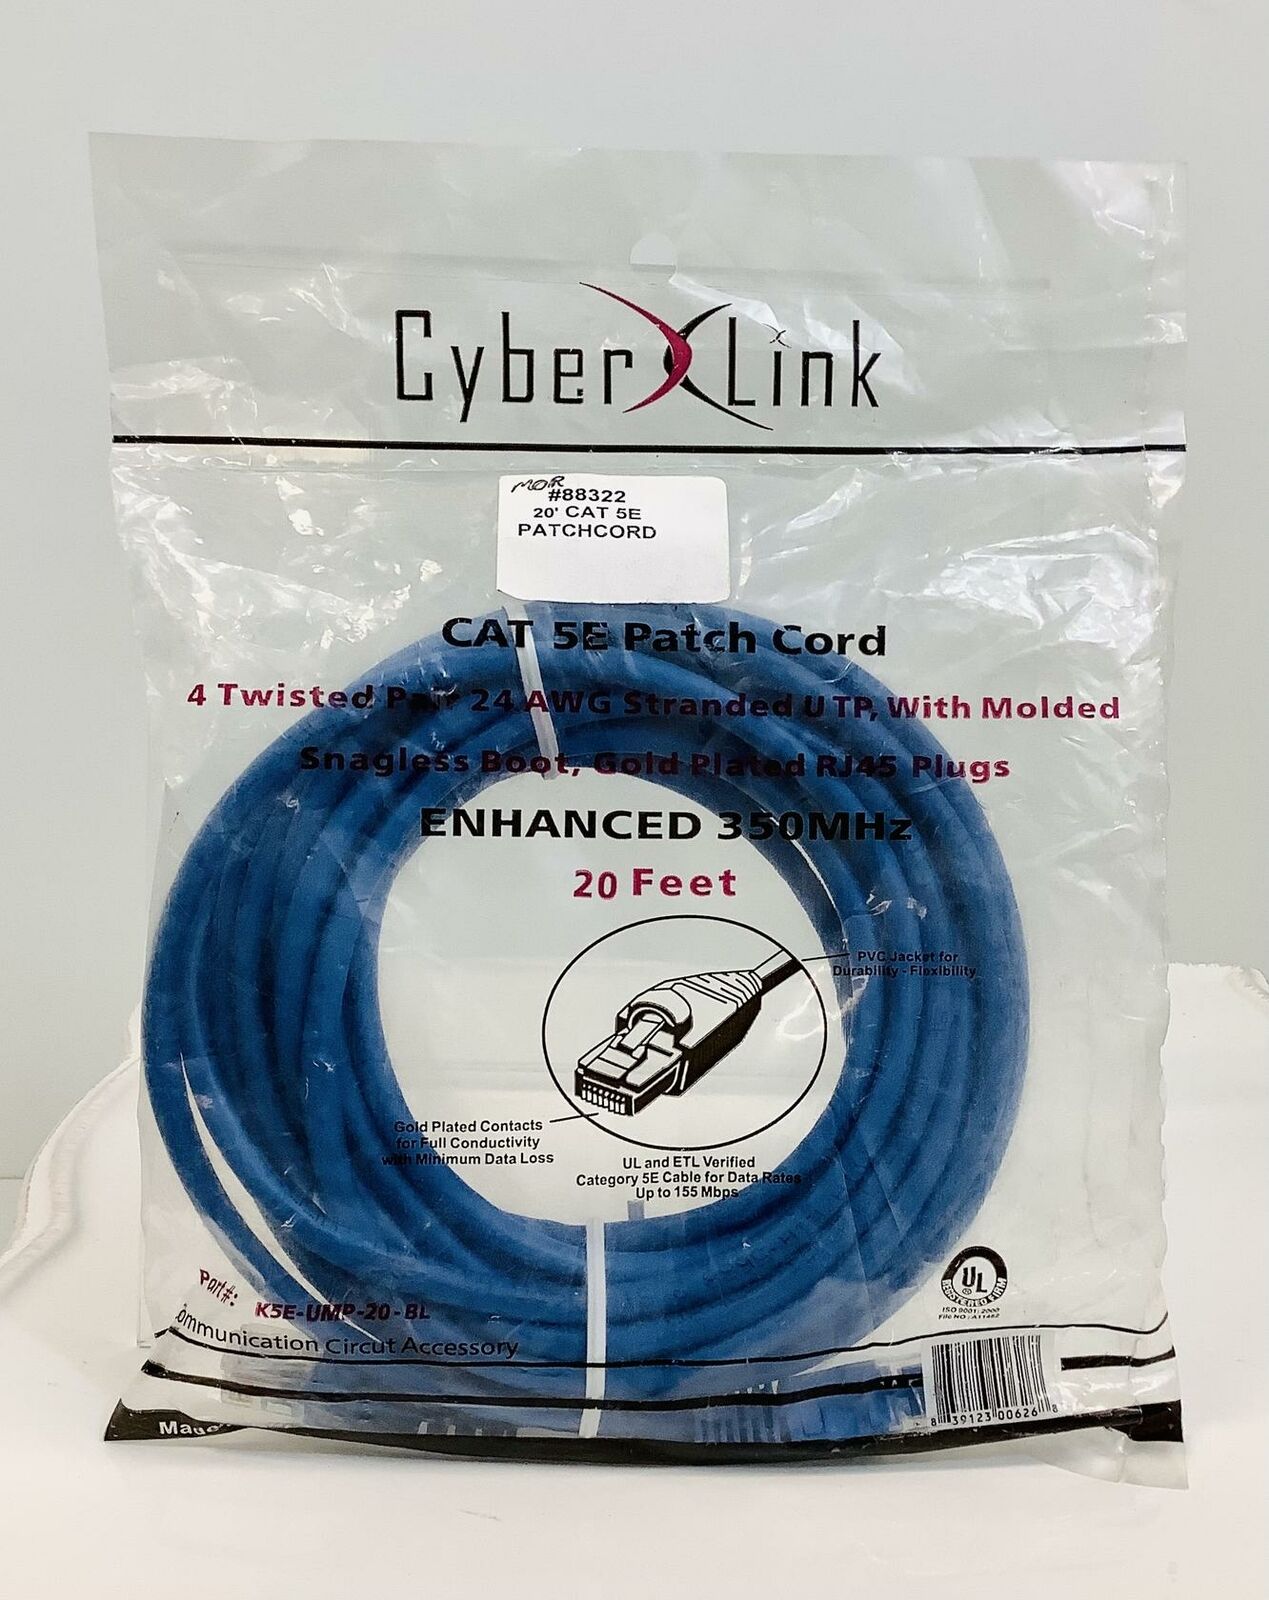 Cyber Link Cat 5E Patch Cord- 4 Twisted Pair-24 AWG Stranded UTP- 20' Long..